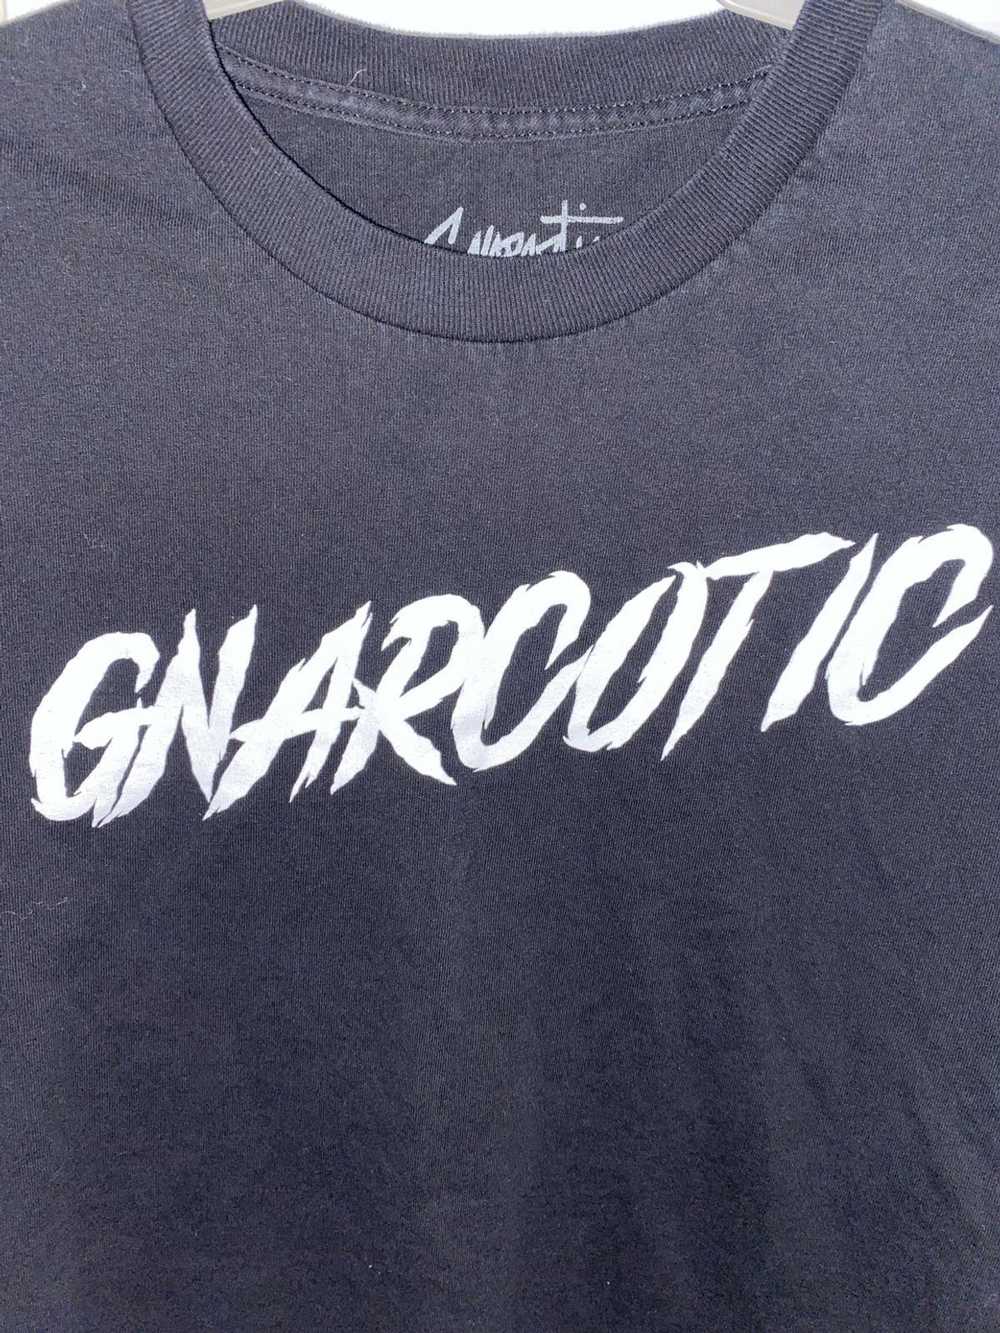 Gnarcotic Gnarcotic Limited Release Tee - image 1